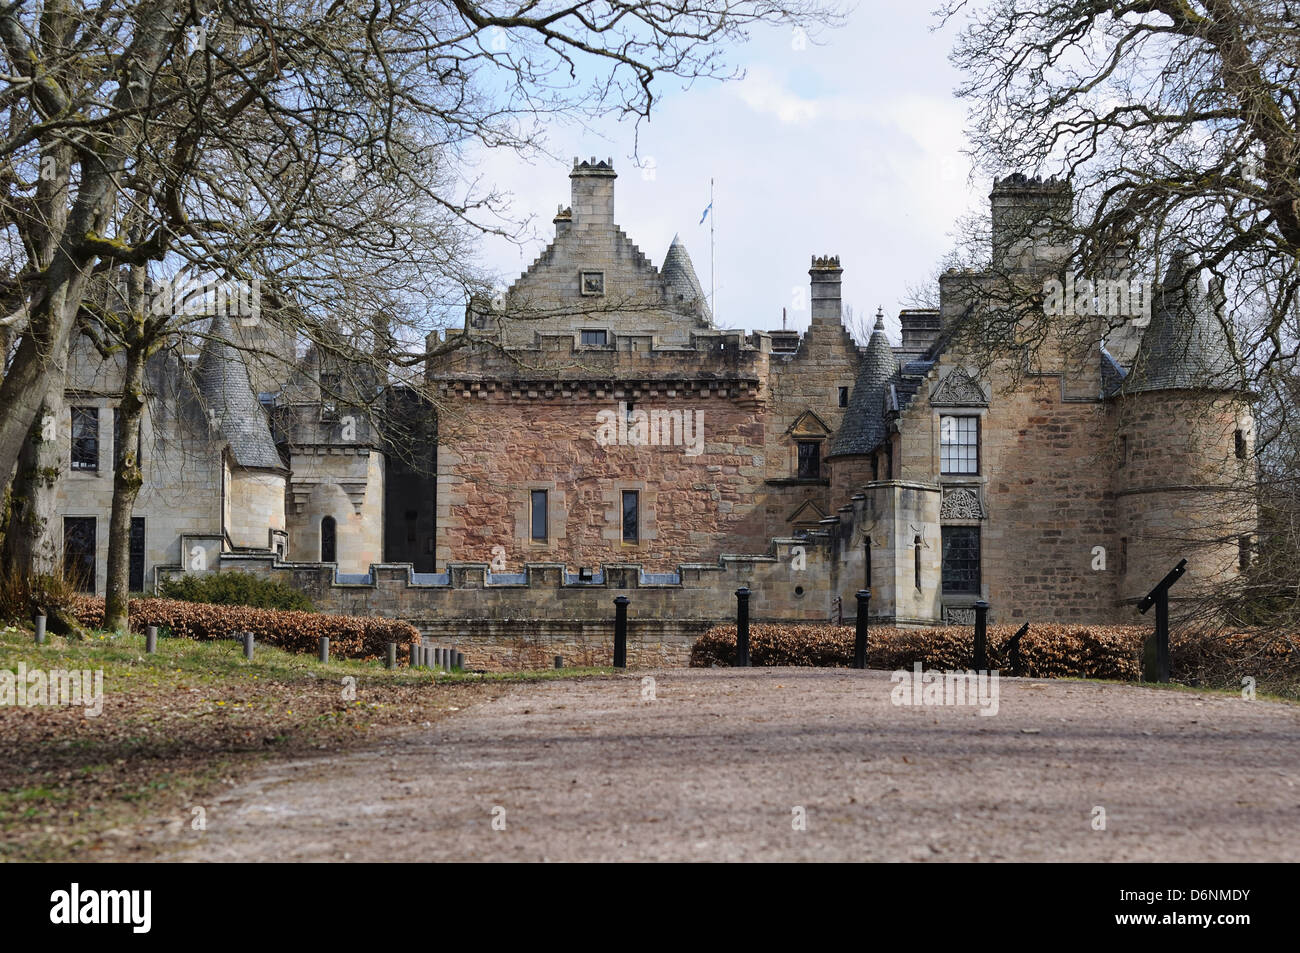 L'Dalzell stately home, Motherwell, North Lanarkshire, Écosse, Royaume-Uni Banque D'Images